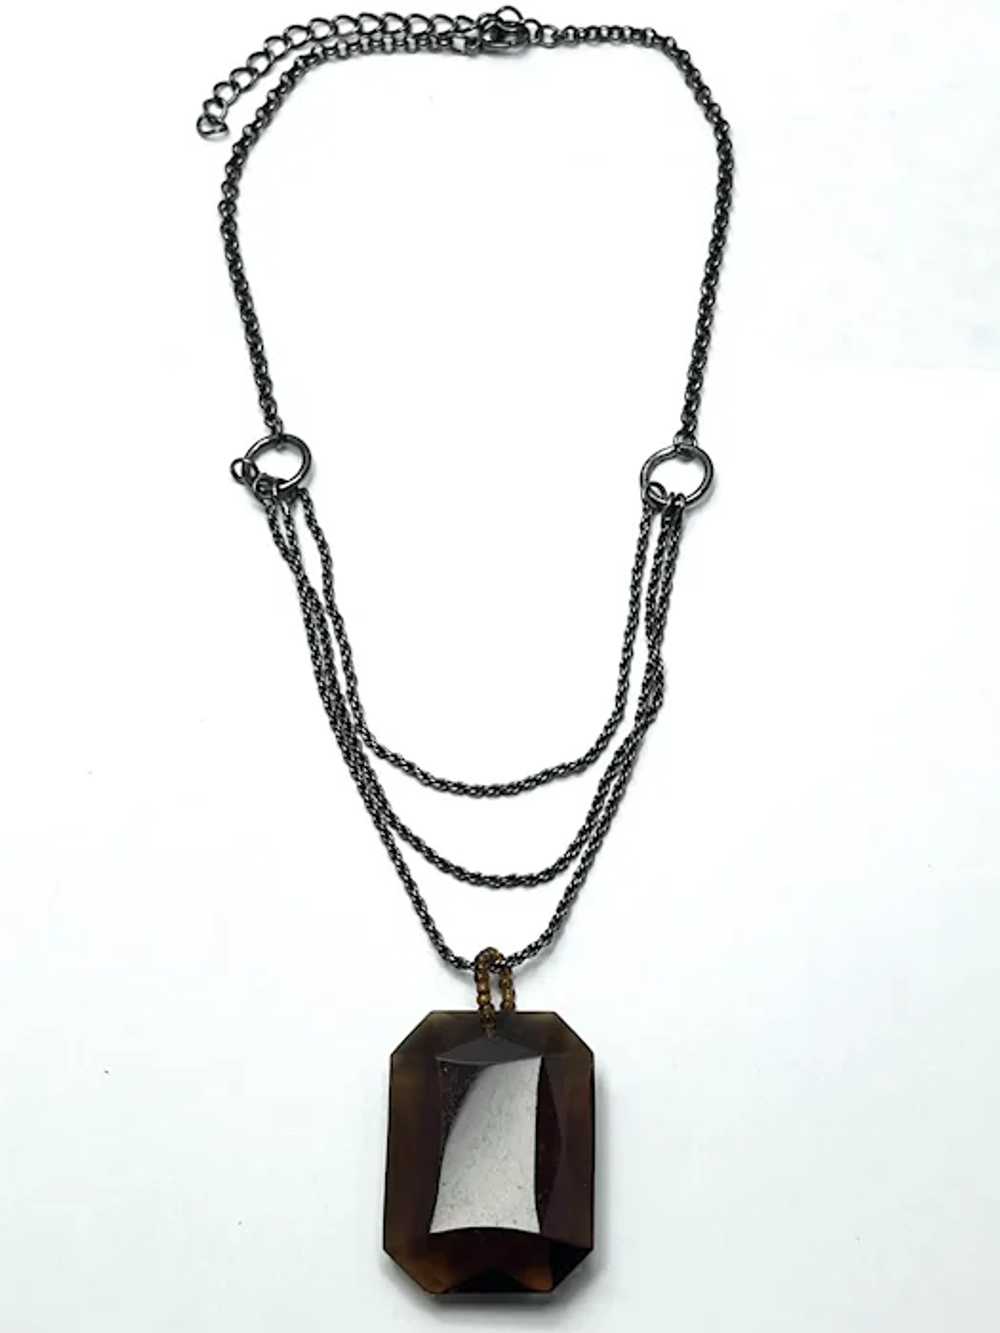 Vintage Crystal Pendant Chain Necklace - image 2